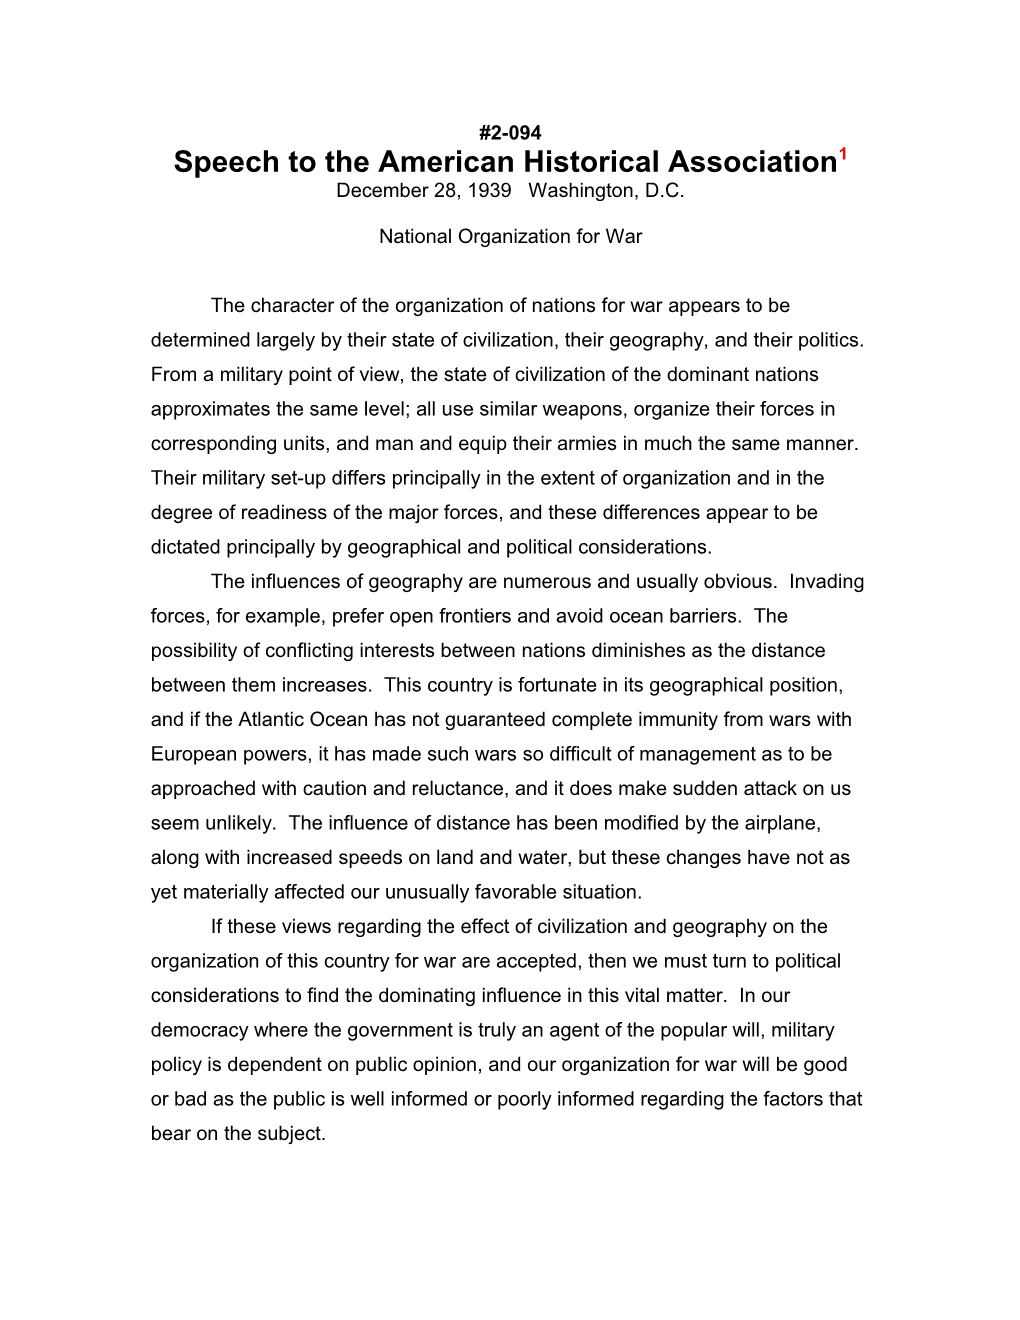 Speech to the American Historical Association1